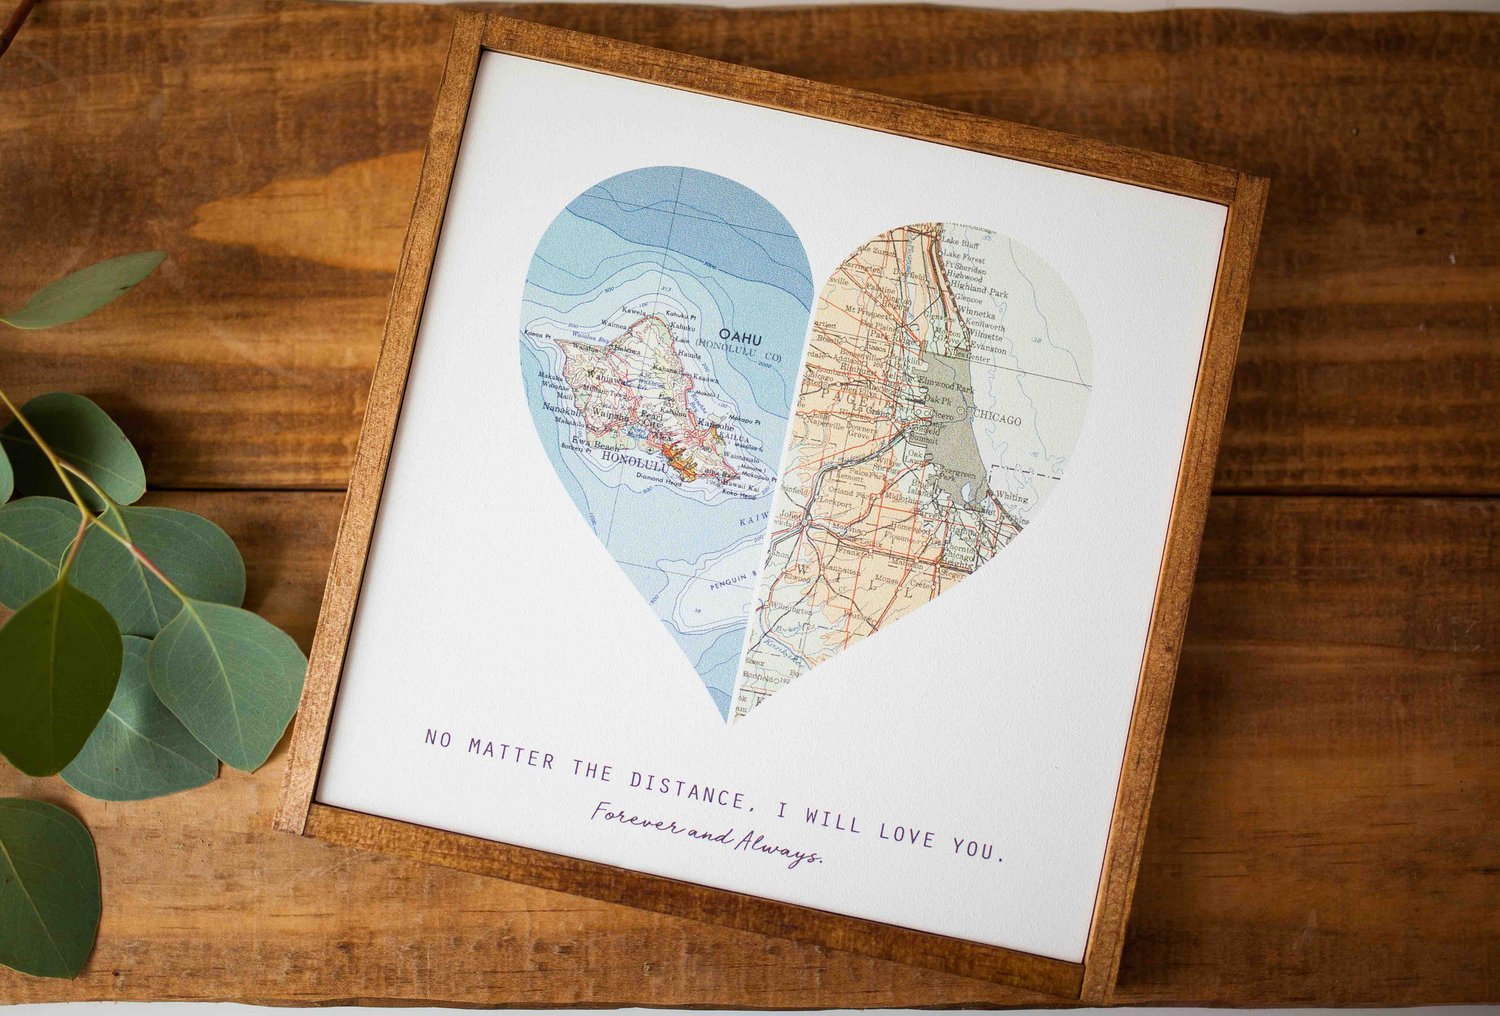 Customized 50 Year Anniversary Gifts Map Print, 50th Anniversary Gift Ideas,  Custom Heart Map Print